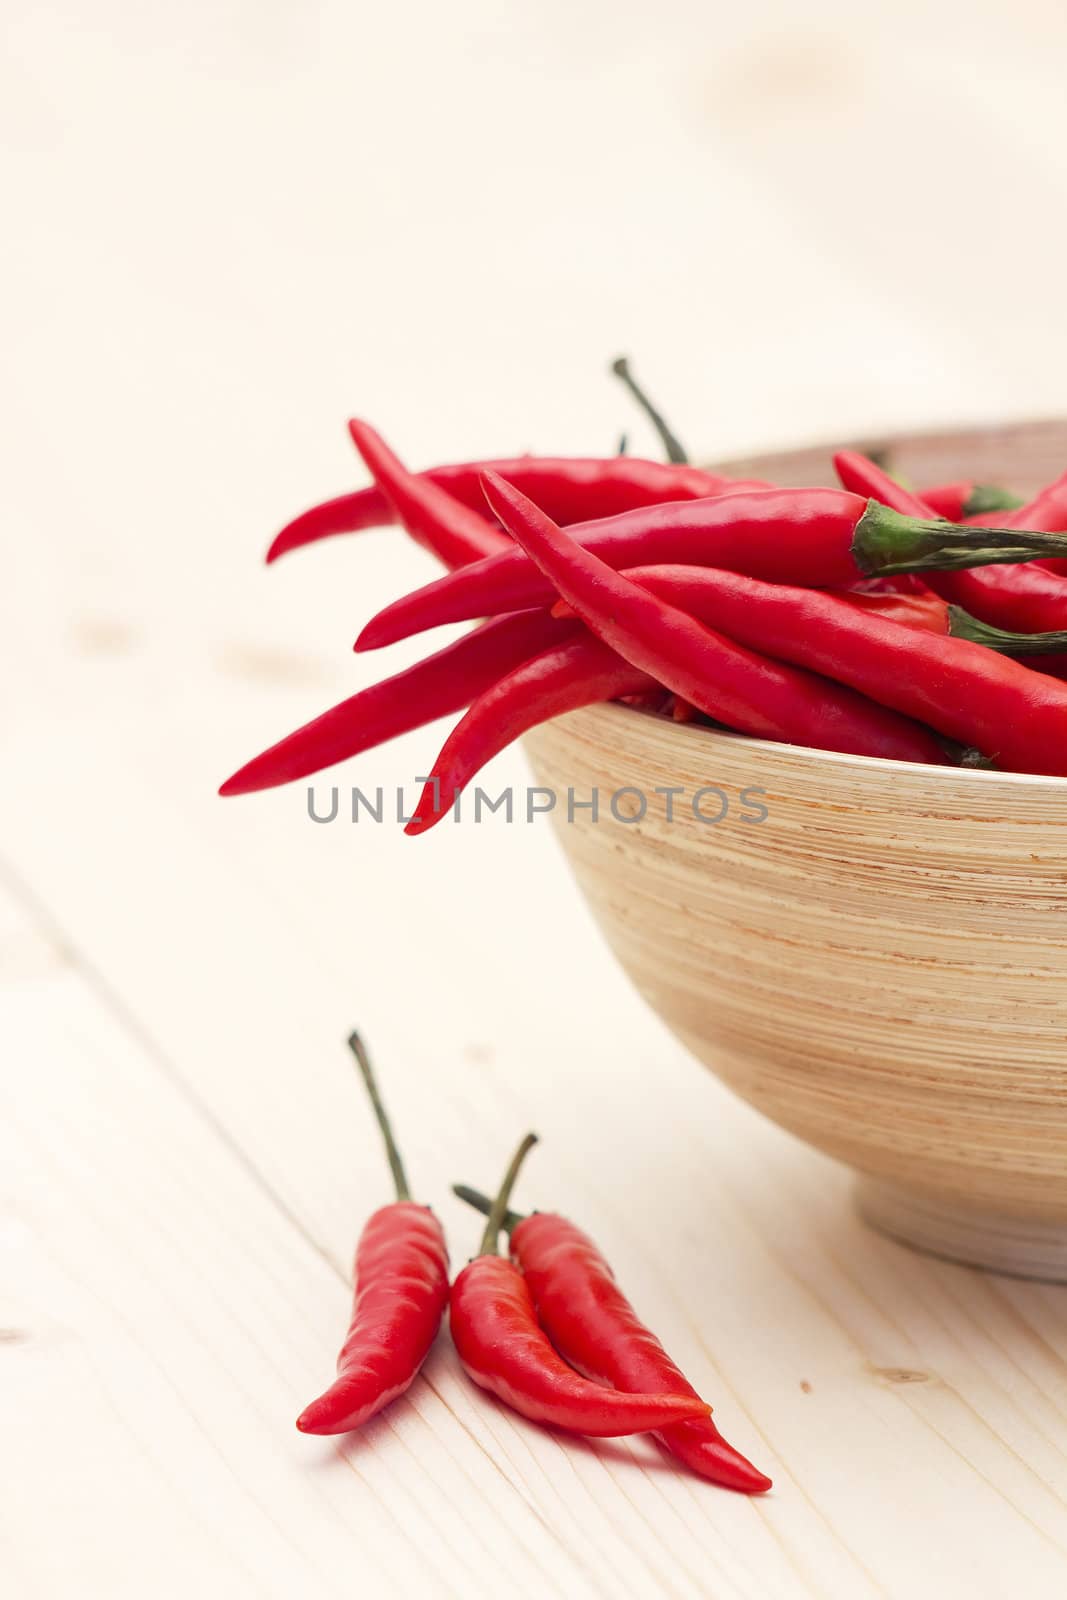 red chili peppers in a bowl by miradrozdowski